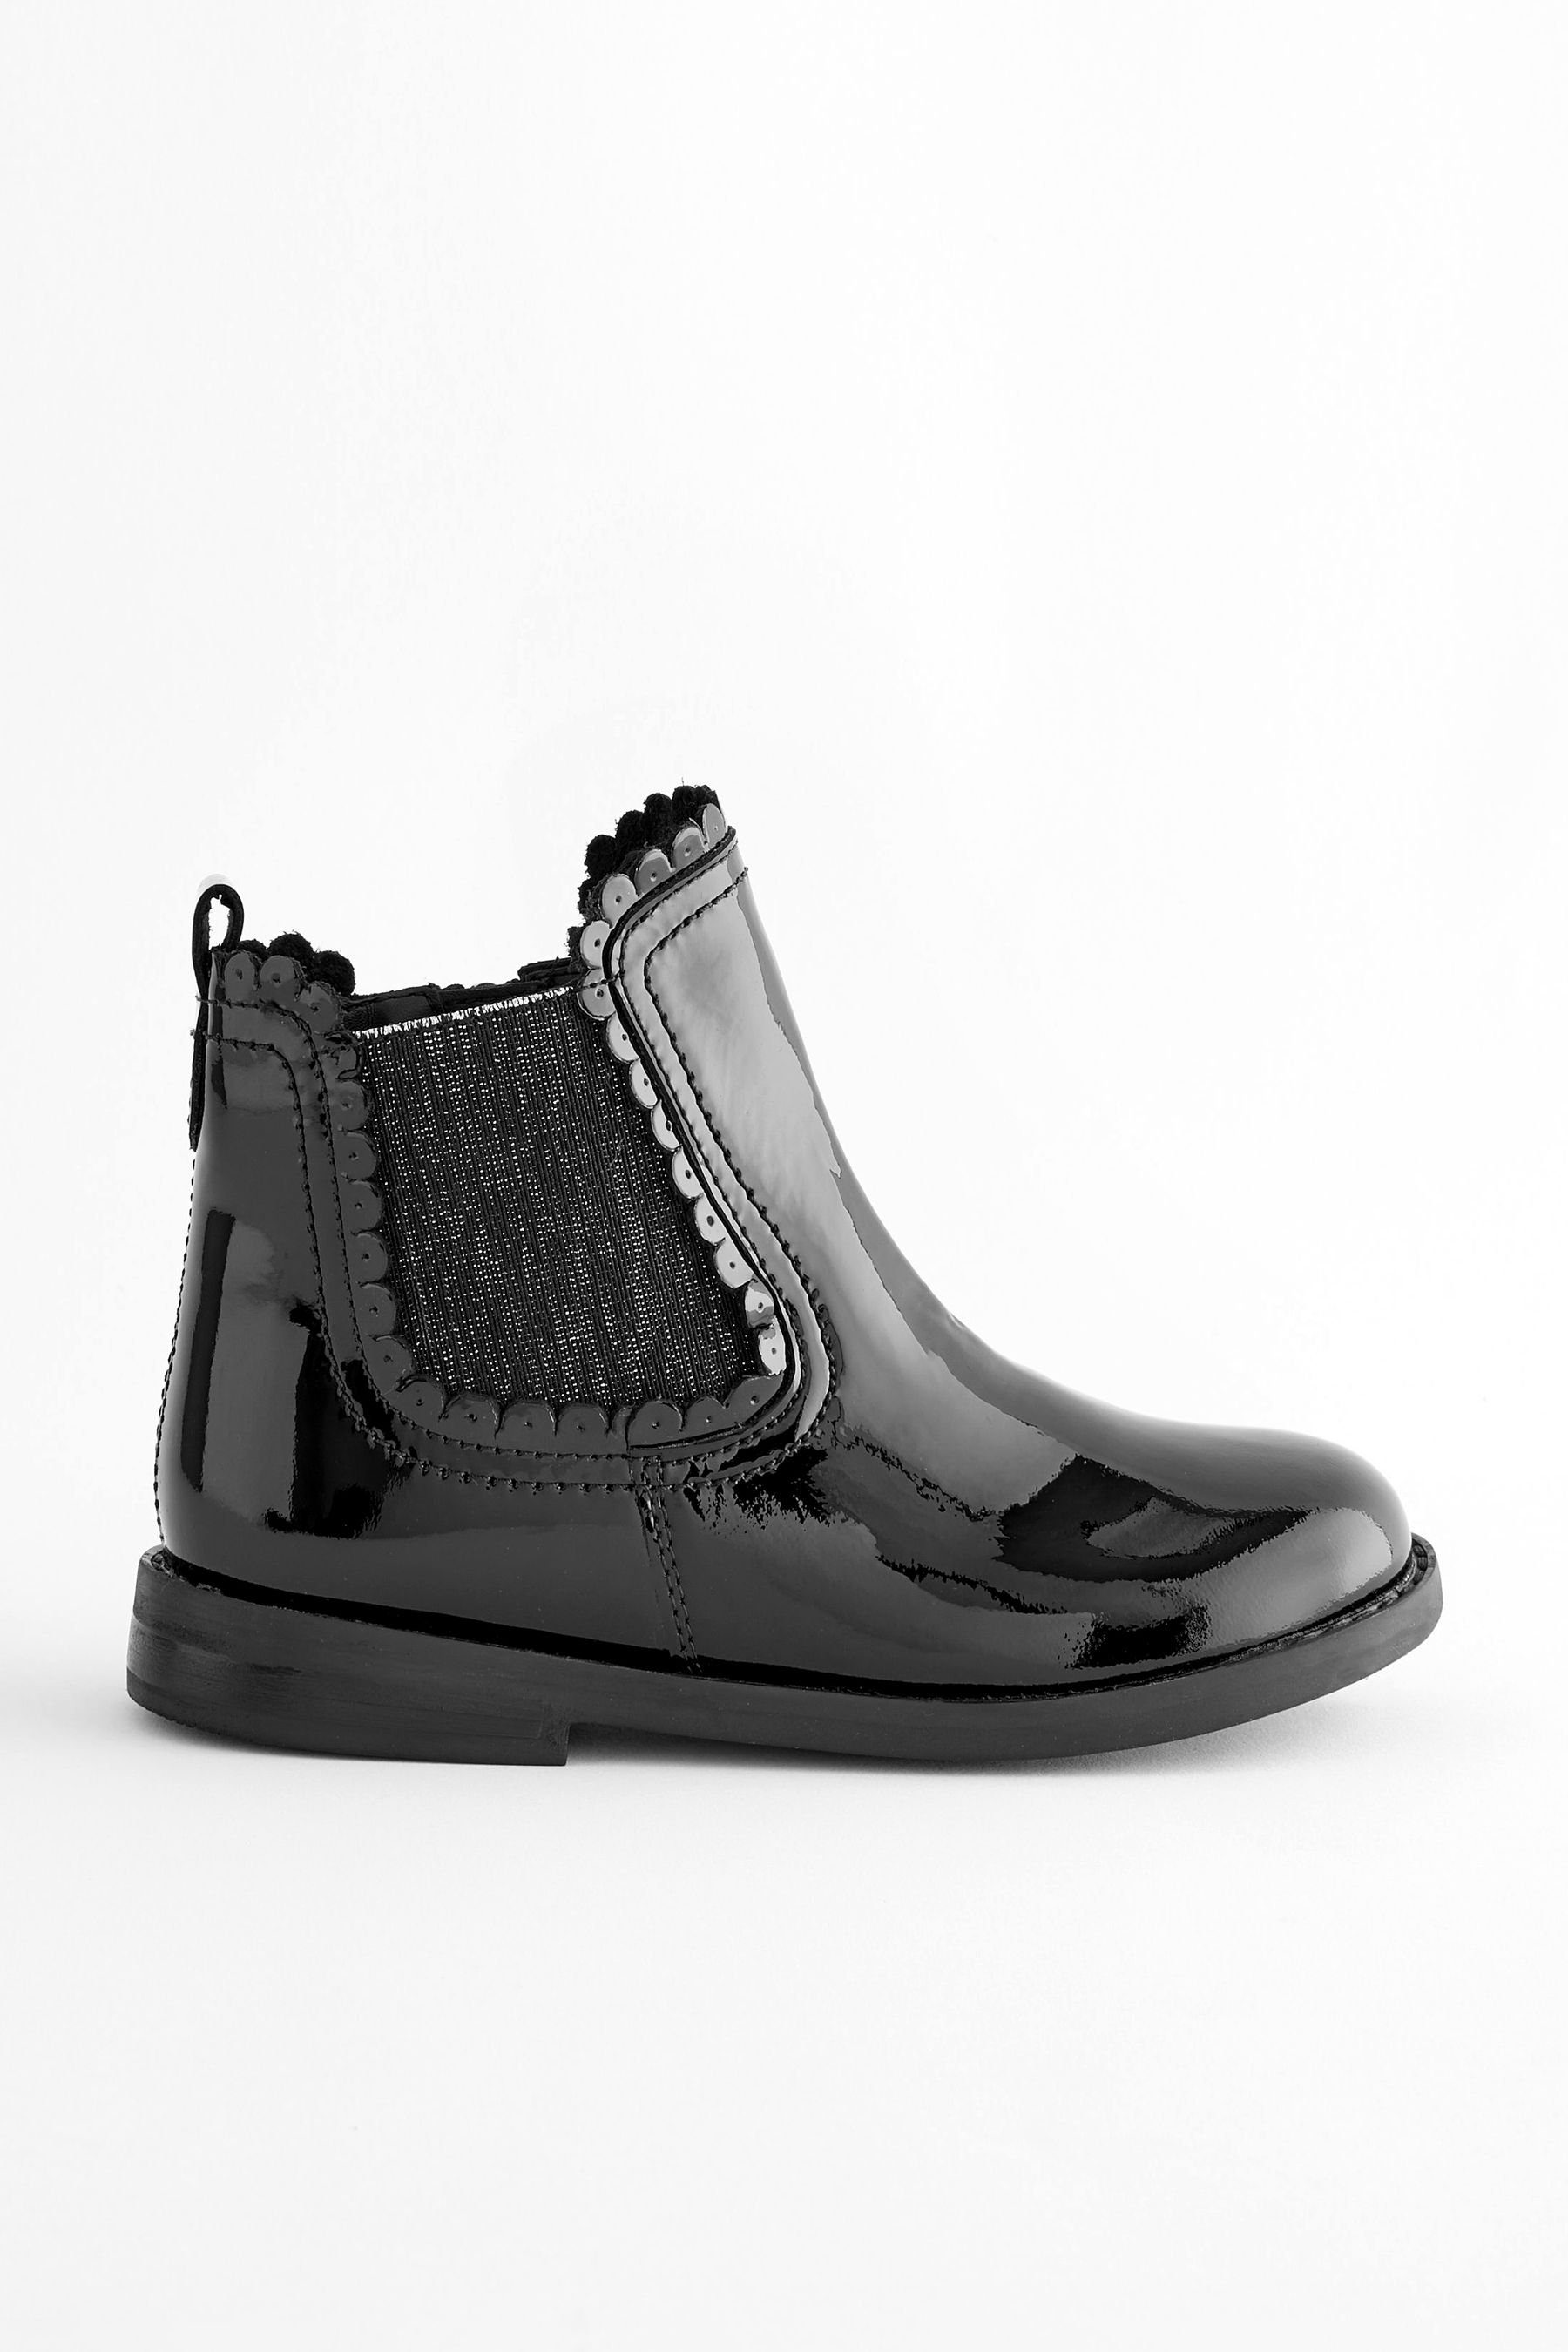 Next Black Chelseaboots Leather Chelsea-Boot Muschelkante mit (1-tlg) Patent